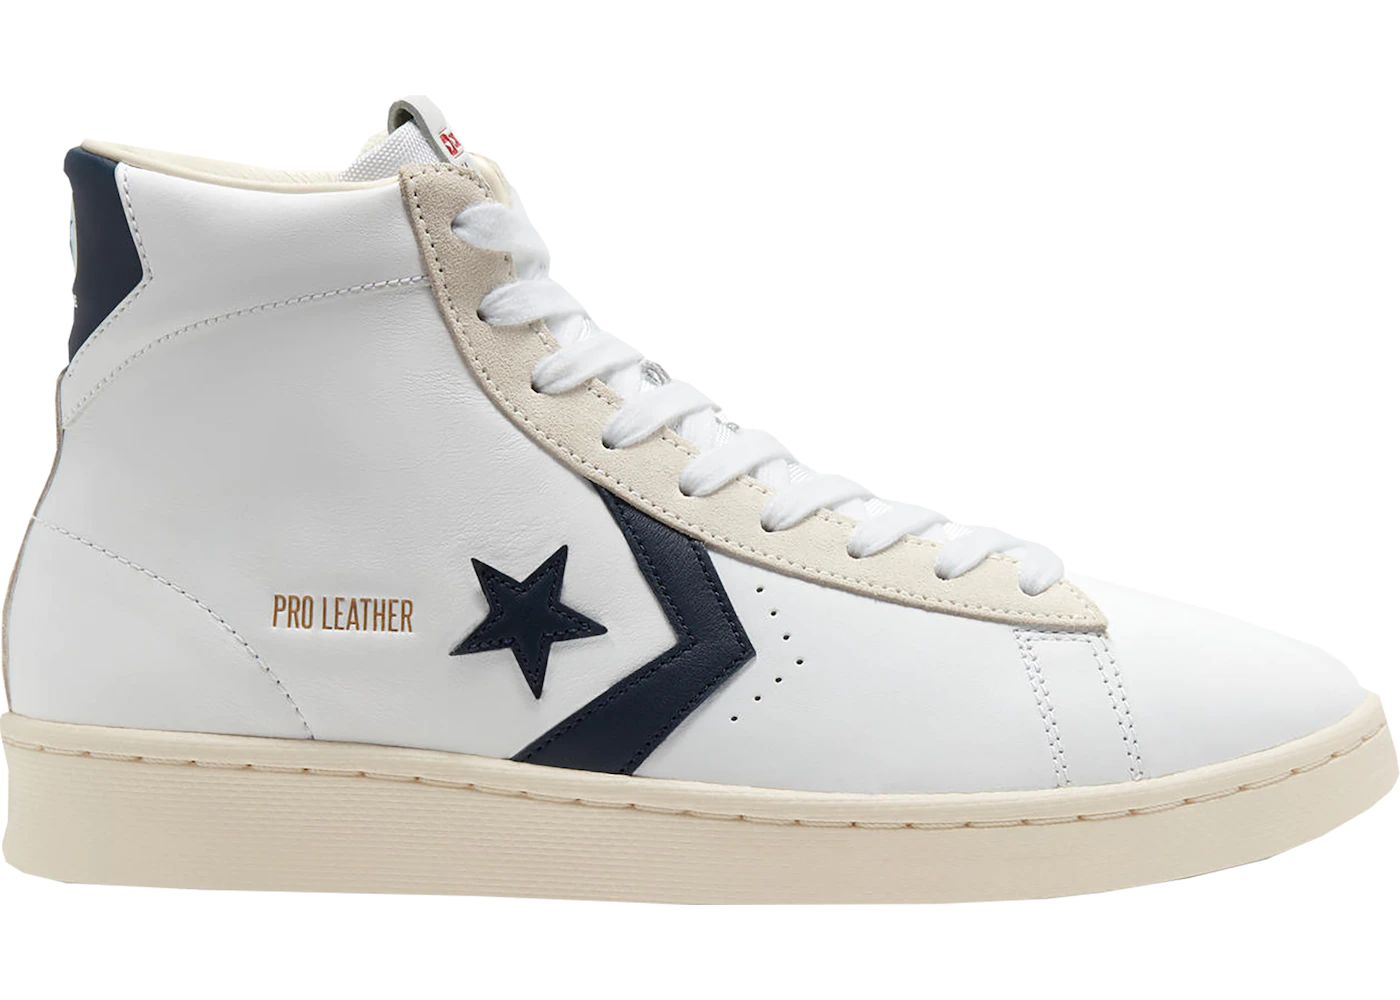 Converse Pro Leather Hi Raise Your Game Men's - Sneakers - US